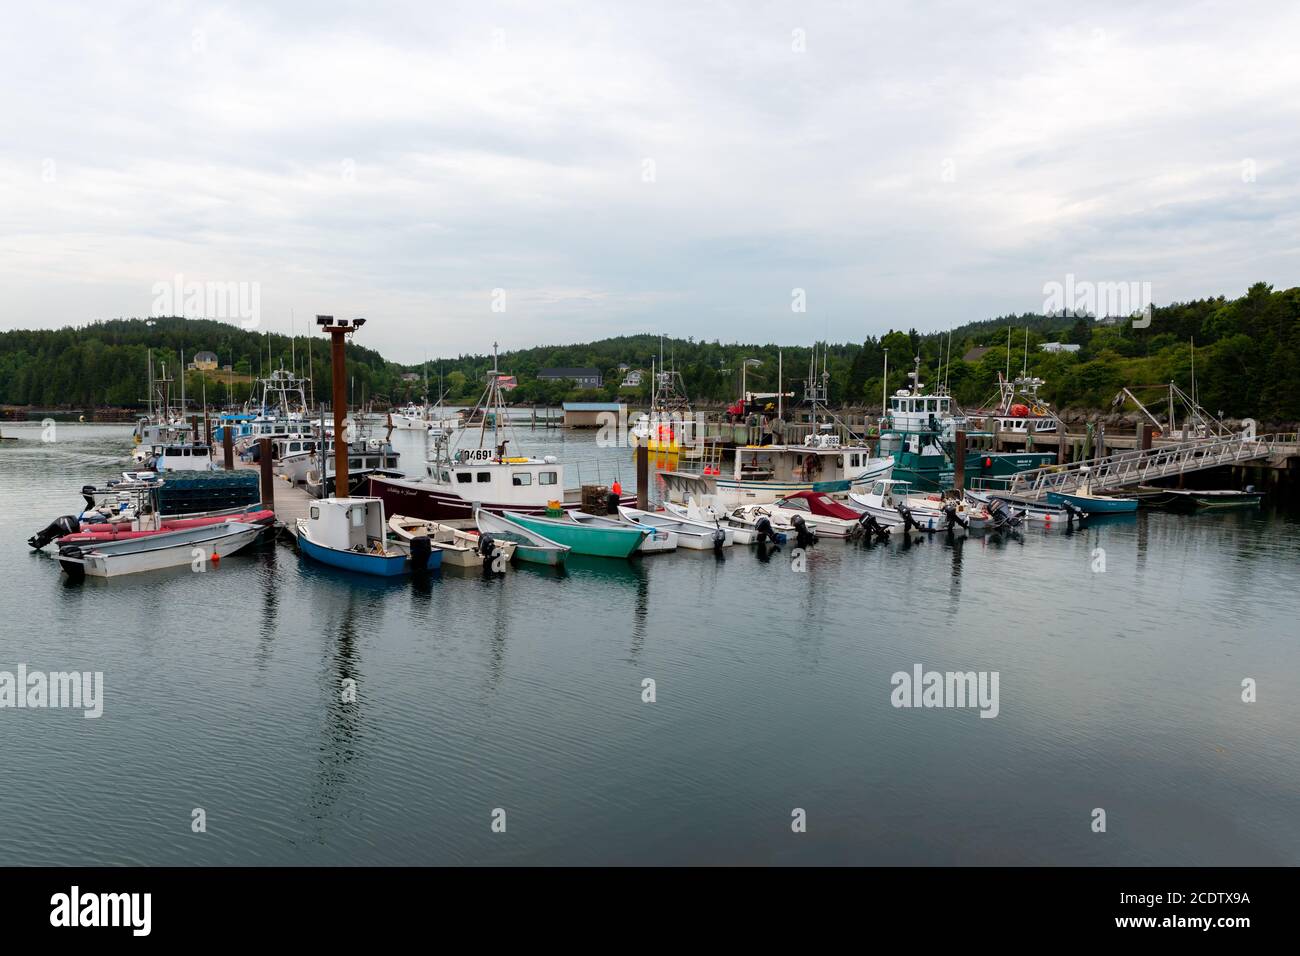 Deer Island, NB, Canada - July 19, 2020: A variety of small fishing boats docked in a harbor. Many dories also present. Overcast sky. Stock Photo